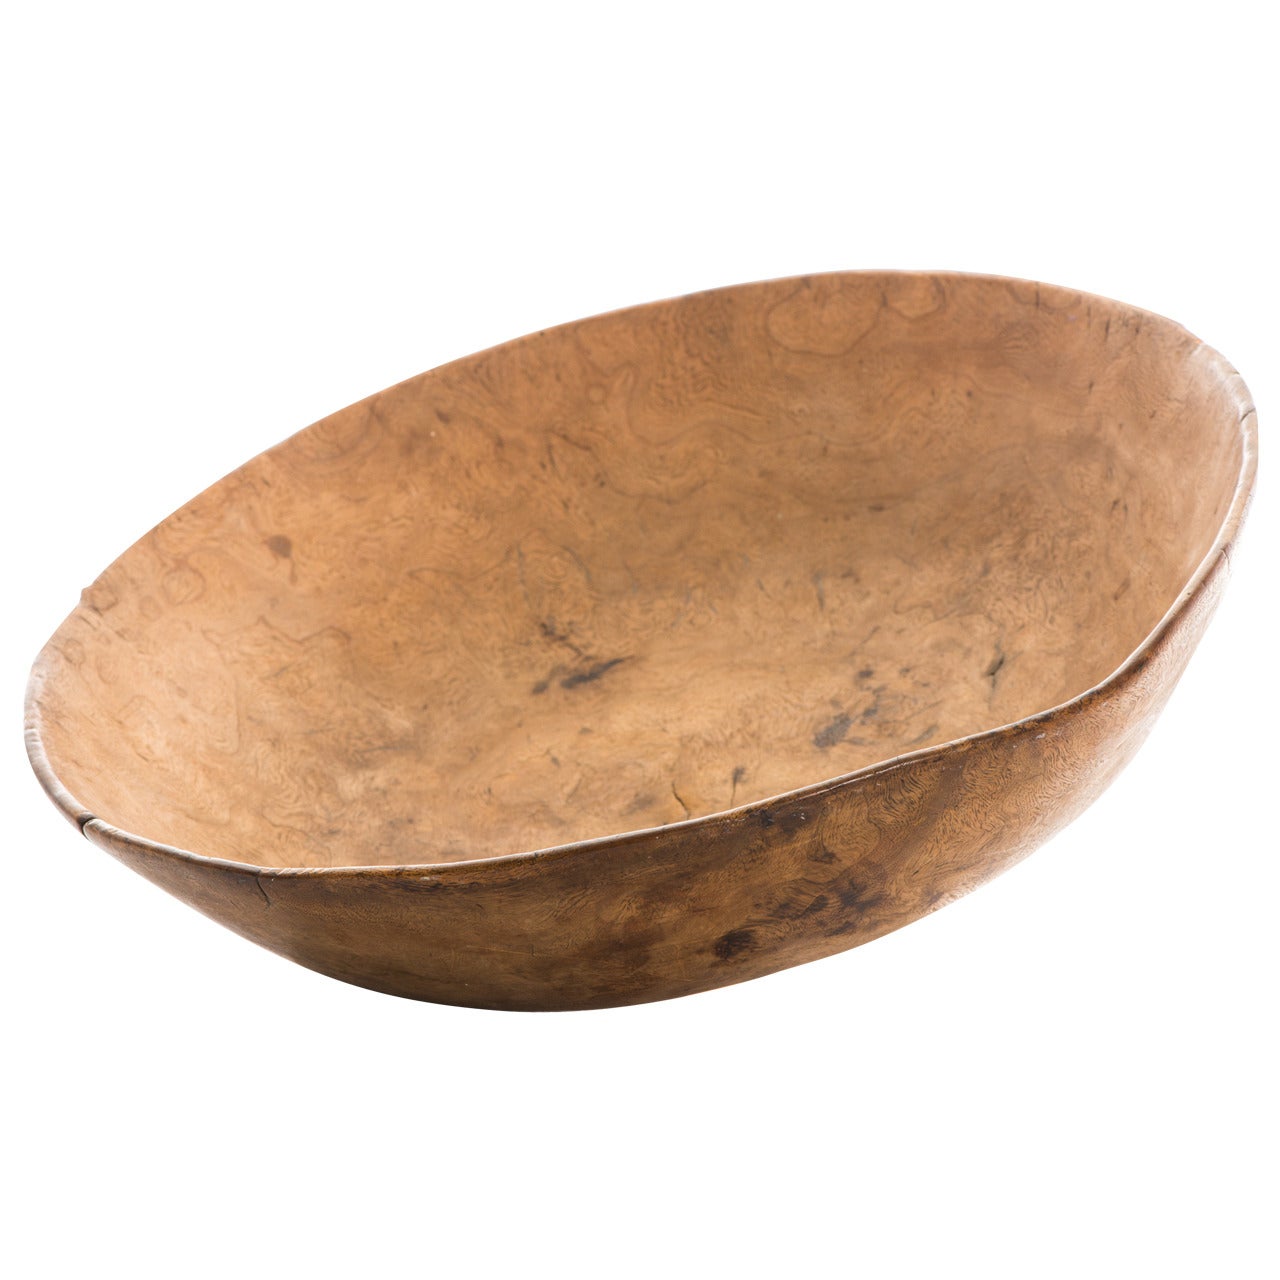 Late 18th to Early 19th Century Large Elm Burl Bowl